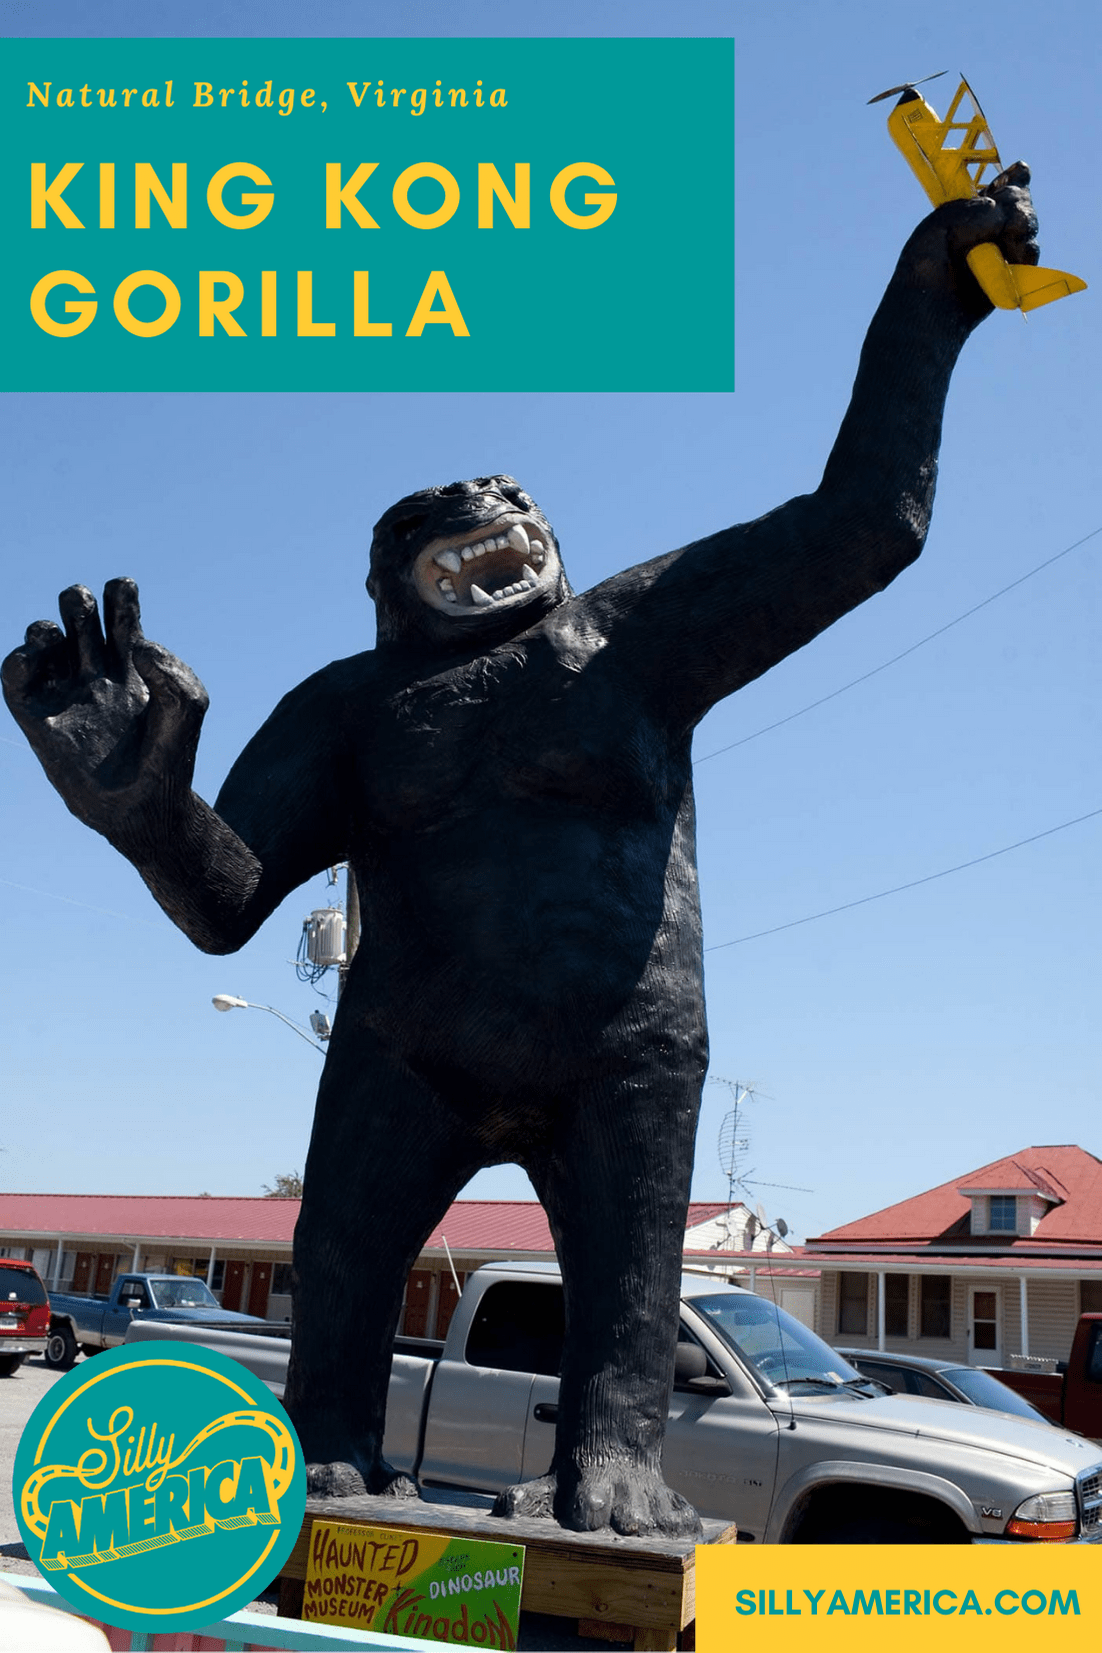 Giant King Kong Gorilla at Pink Cadillac Diner in Natural Bridge, Virginia. The Mark Cline roadside attraction is now at Dinosaur Kingdom II. #VirginiaRoadsideAttractions #VirginiaRoadsideAttraction #RoadsideAttractions #RoadsideAttraction #RoadTrip #VirginiaRoadTrip #VirginiaRoadTripBucketLists #VirginiaBucketList #VirginiaRoadTripIdeas